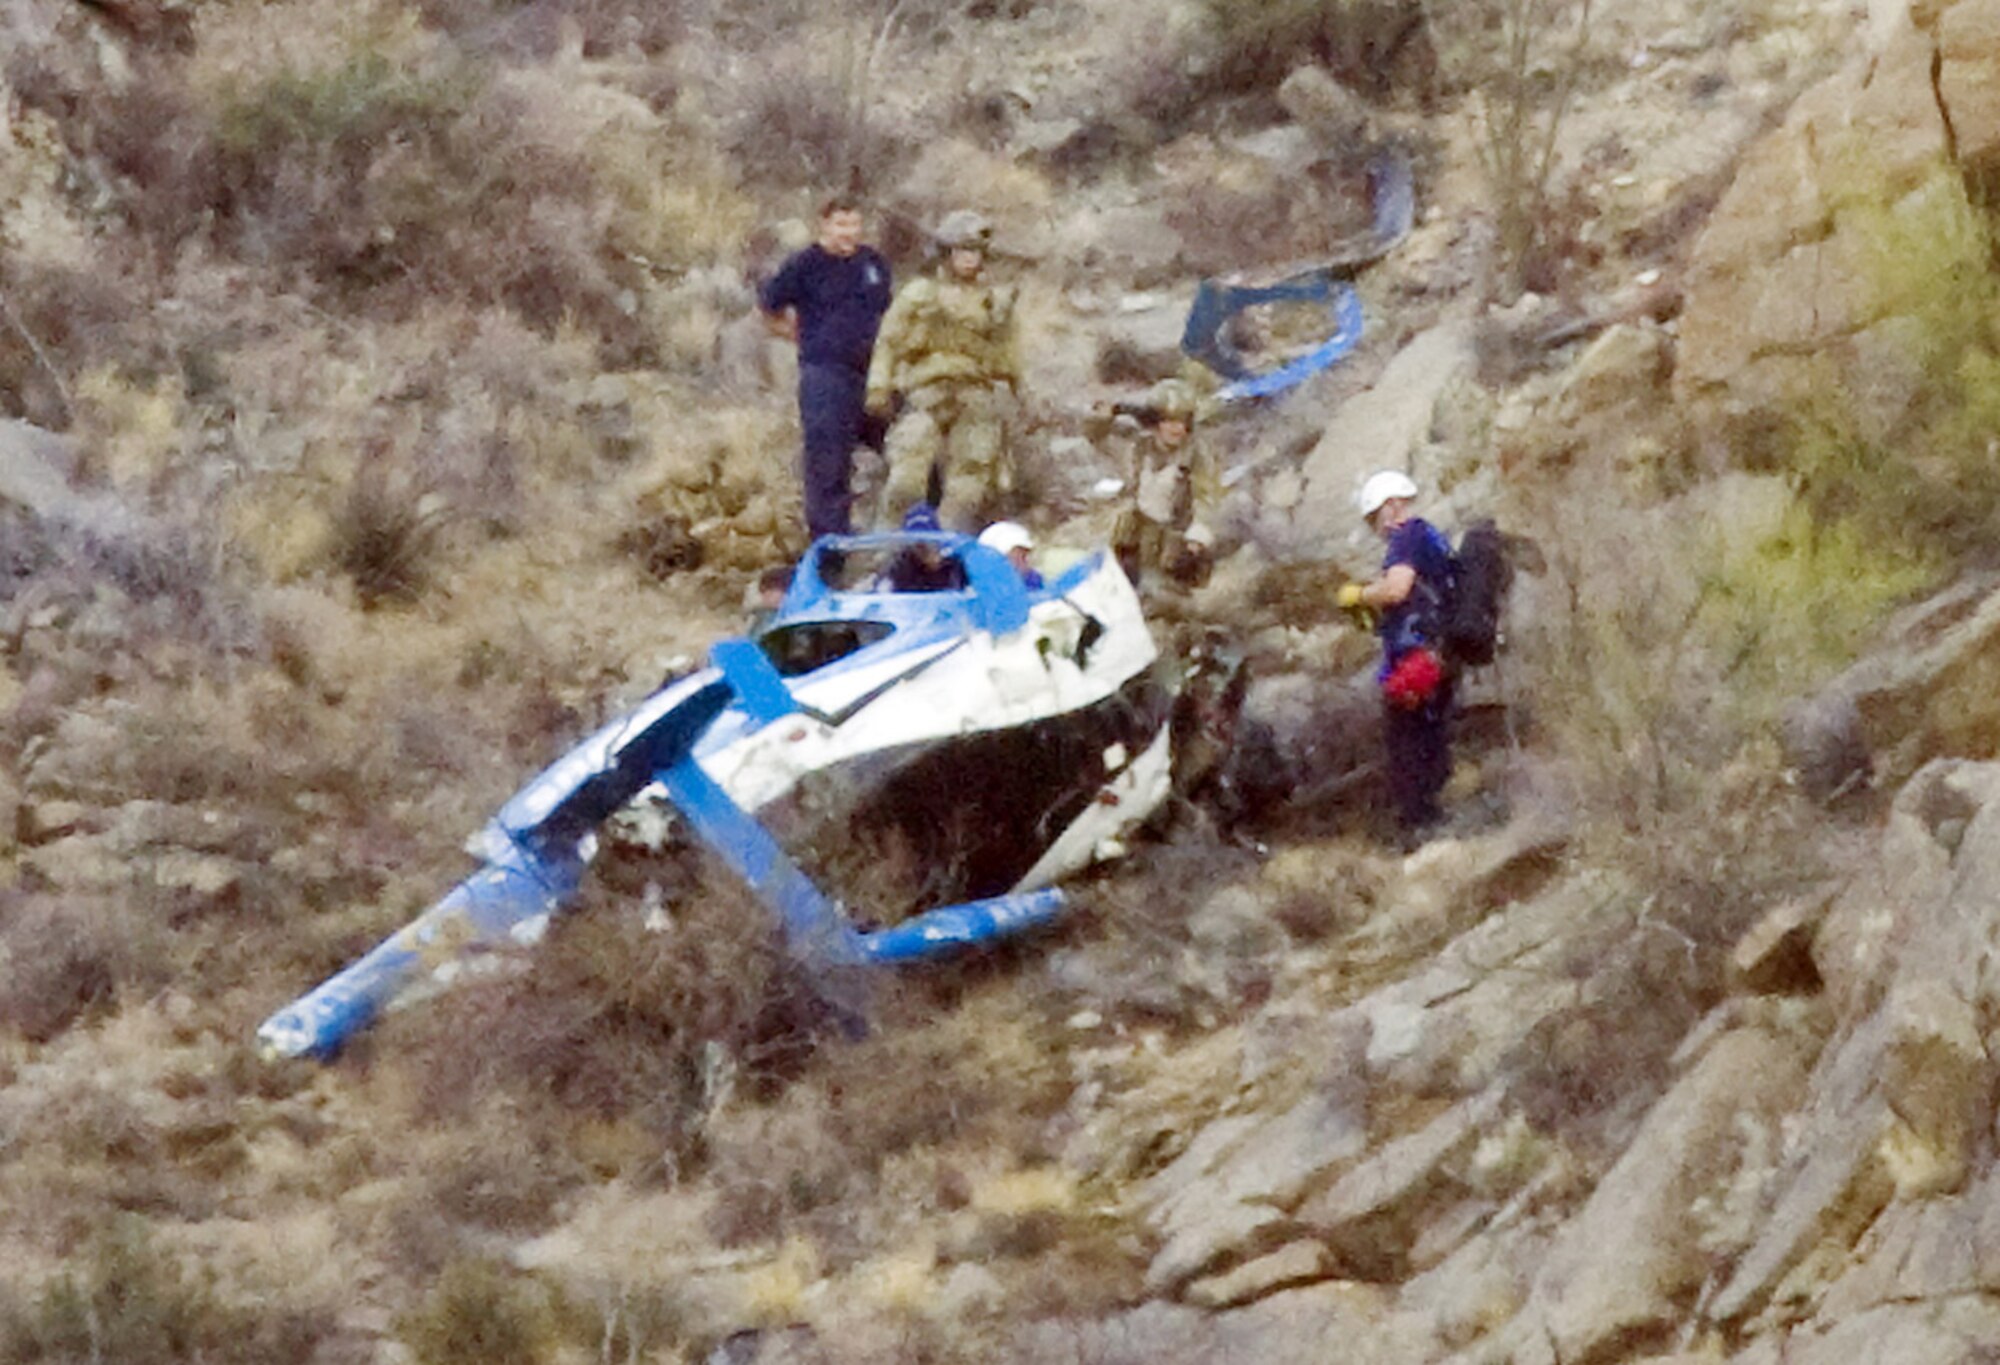 DAVIS-MONTHAN AIR FORCE BASE, Ariz. - Air Force Reserve combat rescue officers and pararescuemen from the 943rd Rescue Group here, responded to an Arizona Sheriff's helicopter crash in the Waterman mountains, northwest of Tuscon. The Airmen used their combat rescue skills to provide medical aid to the surivors who were then airlifted by Airmen piloting two HH-60G Pave Hawk helicopters from the 943rd RQG. They airlifted the survivors to a nearby hospital. The crash killed one and injured three others. (Arizona Daily Star photo/Mr. Dean Knuth)